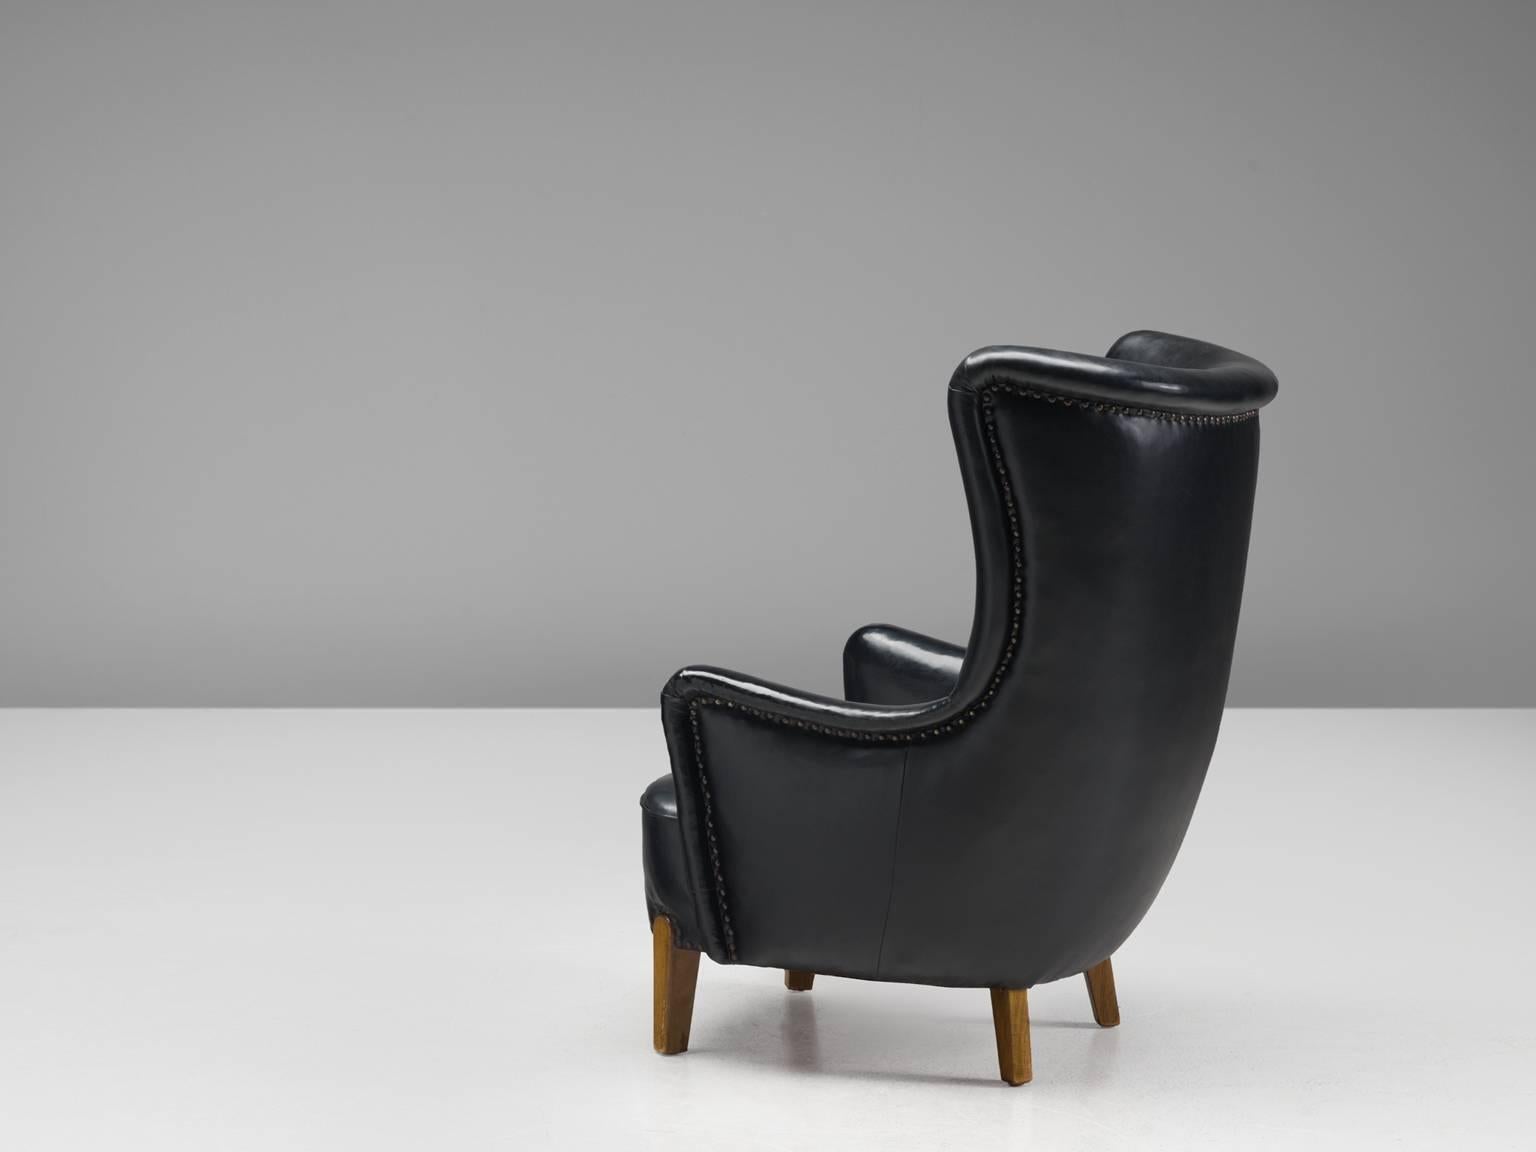 Easy chair, black faux leather and beech, Denmark, 1960s

This black leatherette chair is manufactured by a Danish cabinetmaker. The easy chair features legs of beech. The seat, sides and back are upholstered with black nail fitted vinyl that forms